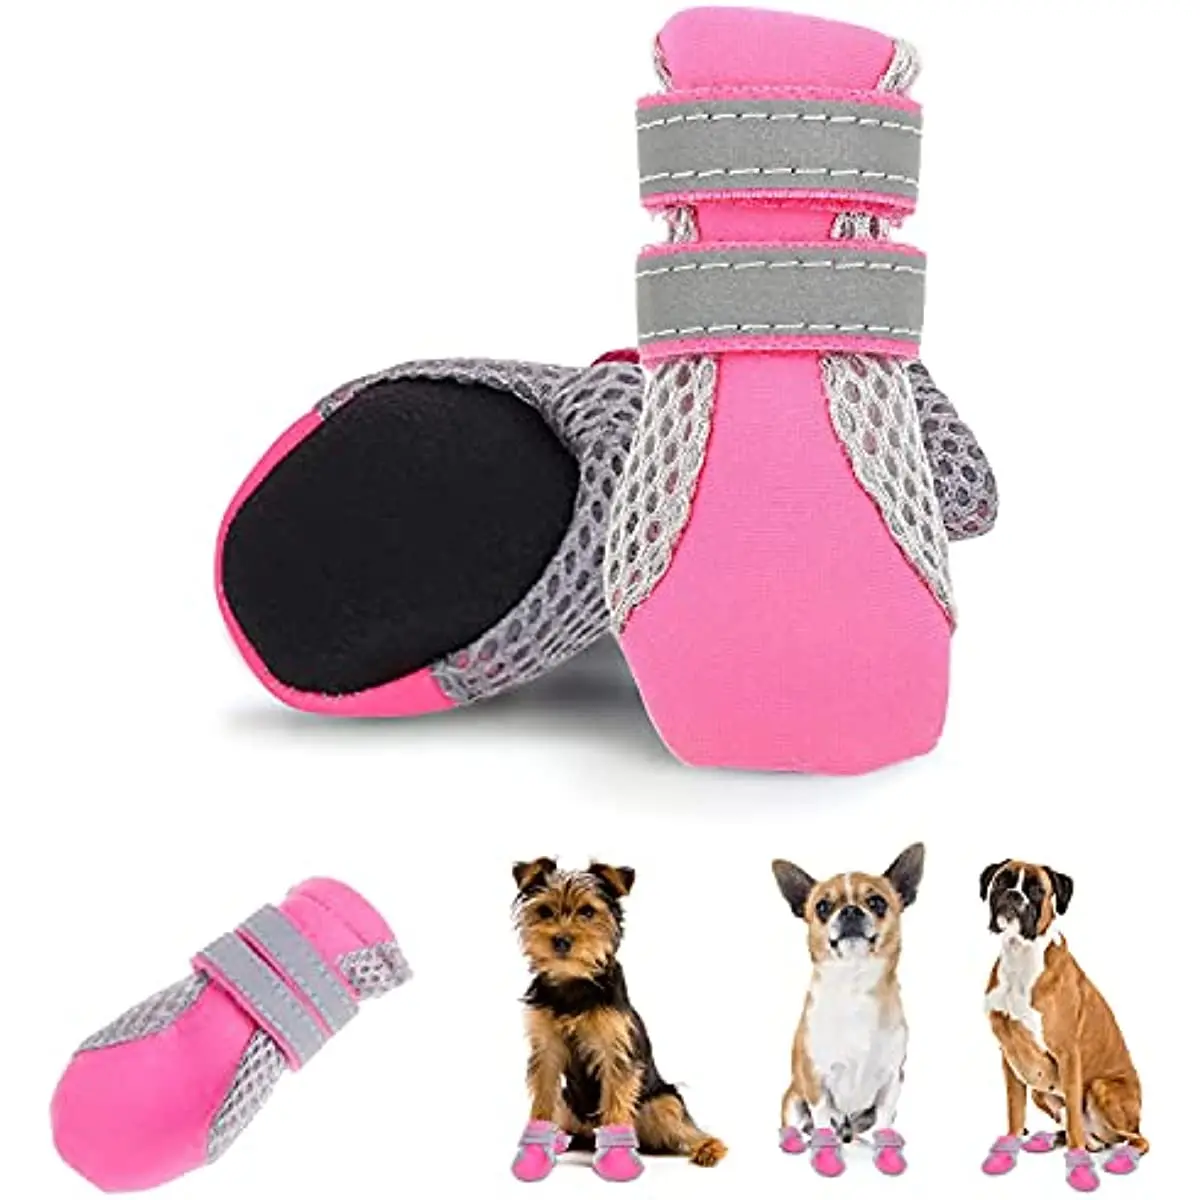 

Dog Shoes for Hot Pavement Winter Boots Paw Protectors Booties Adjustable Reflective Strips and Rugged Anti-Slip Breathable Mesh